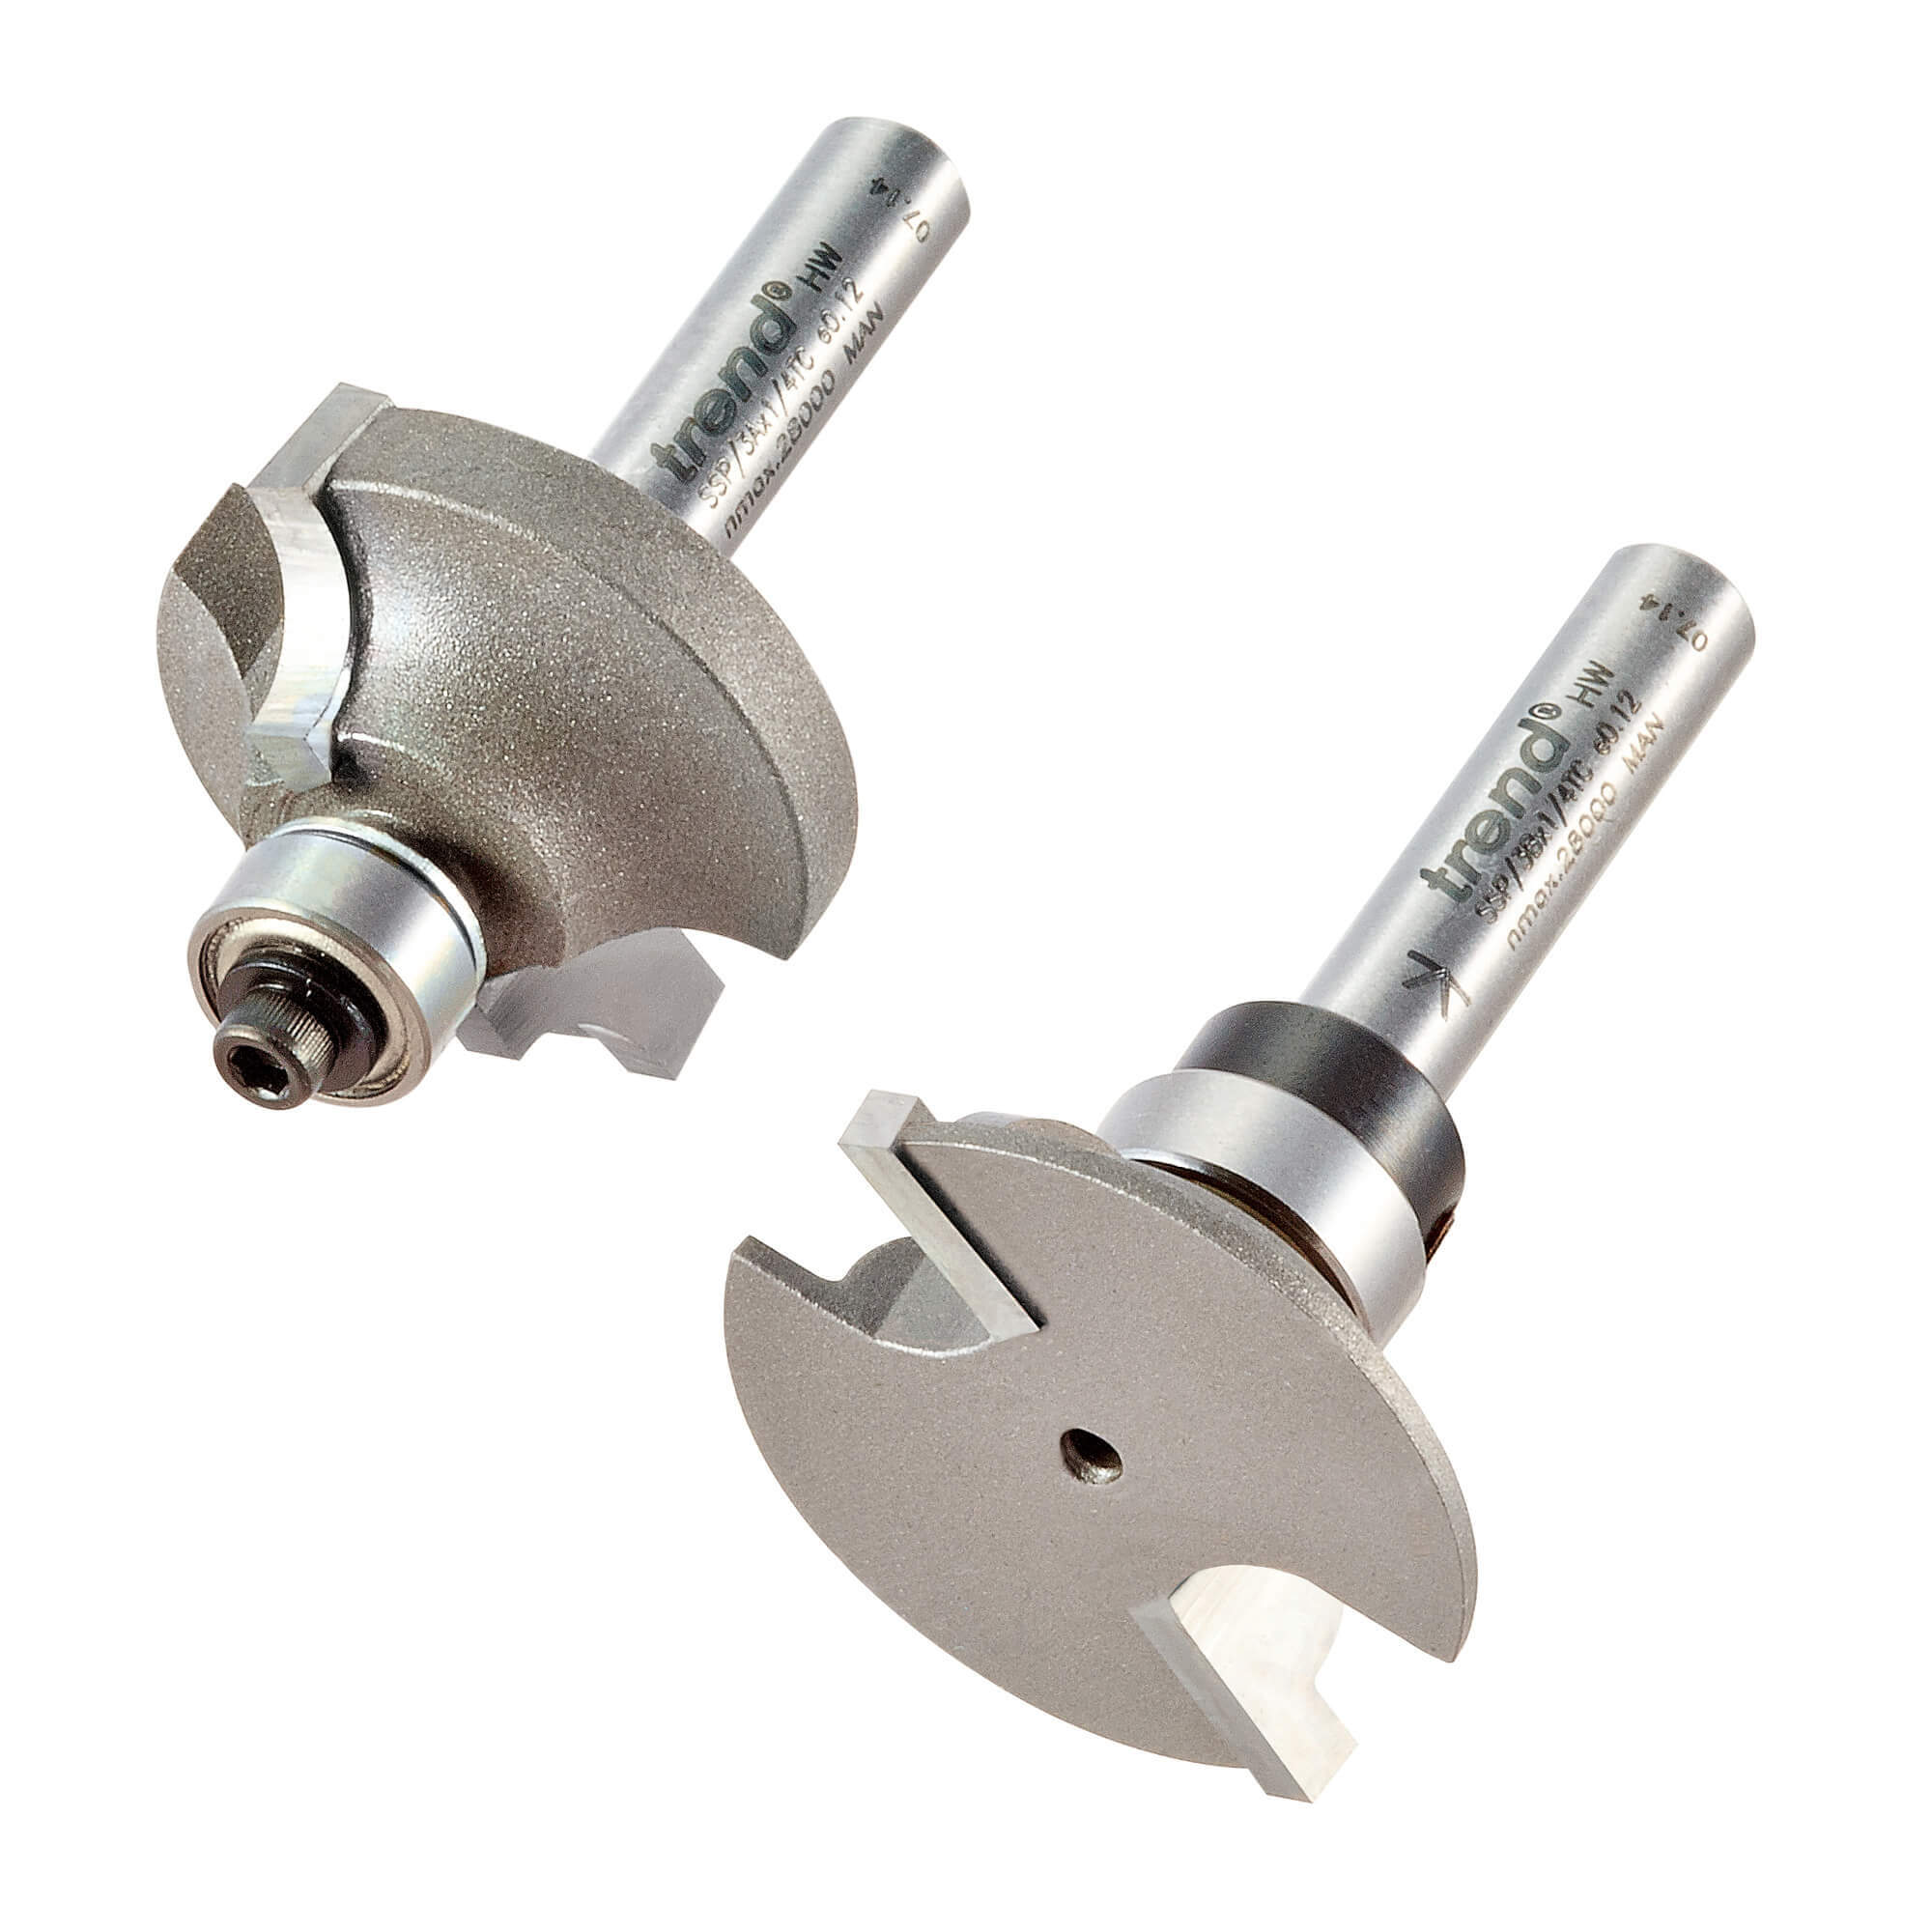 Image of Trend Shoulder Scribe and Profile Router Cutter Set 30.7mm 6mm 1/4"